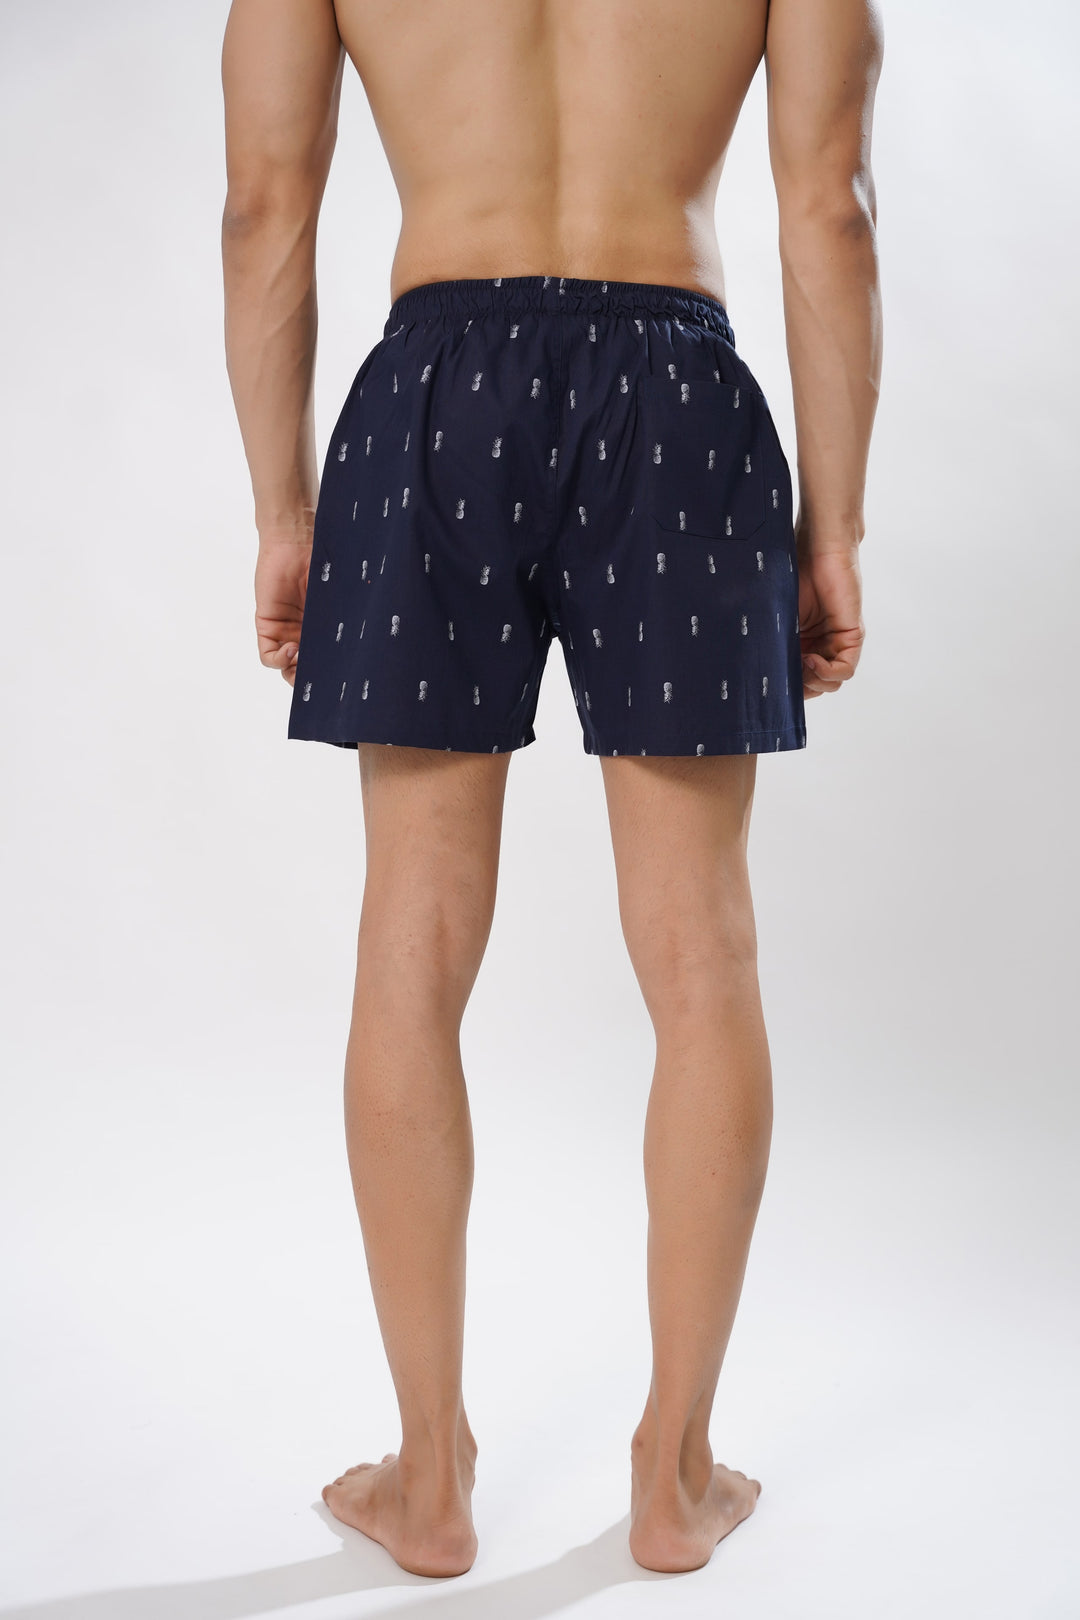 Navy Blue All Over Mini Coconut Printed Men's Boxers